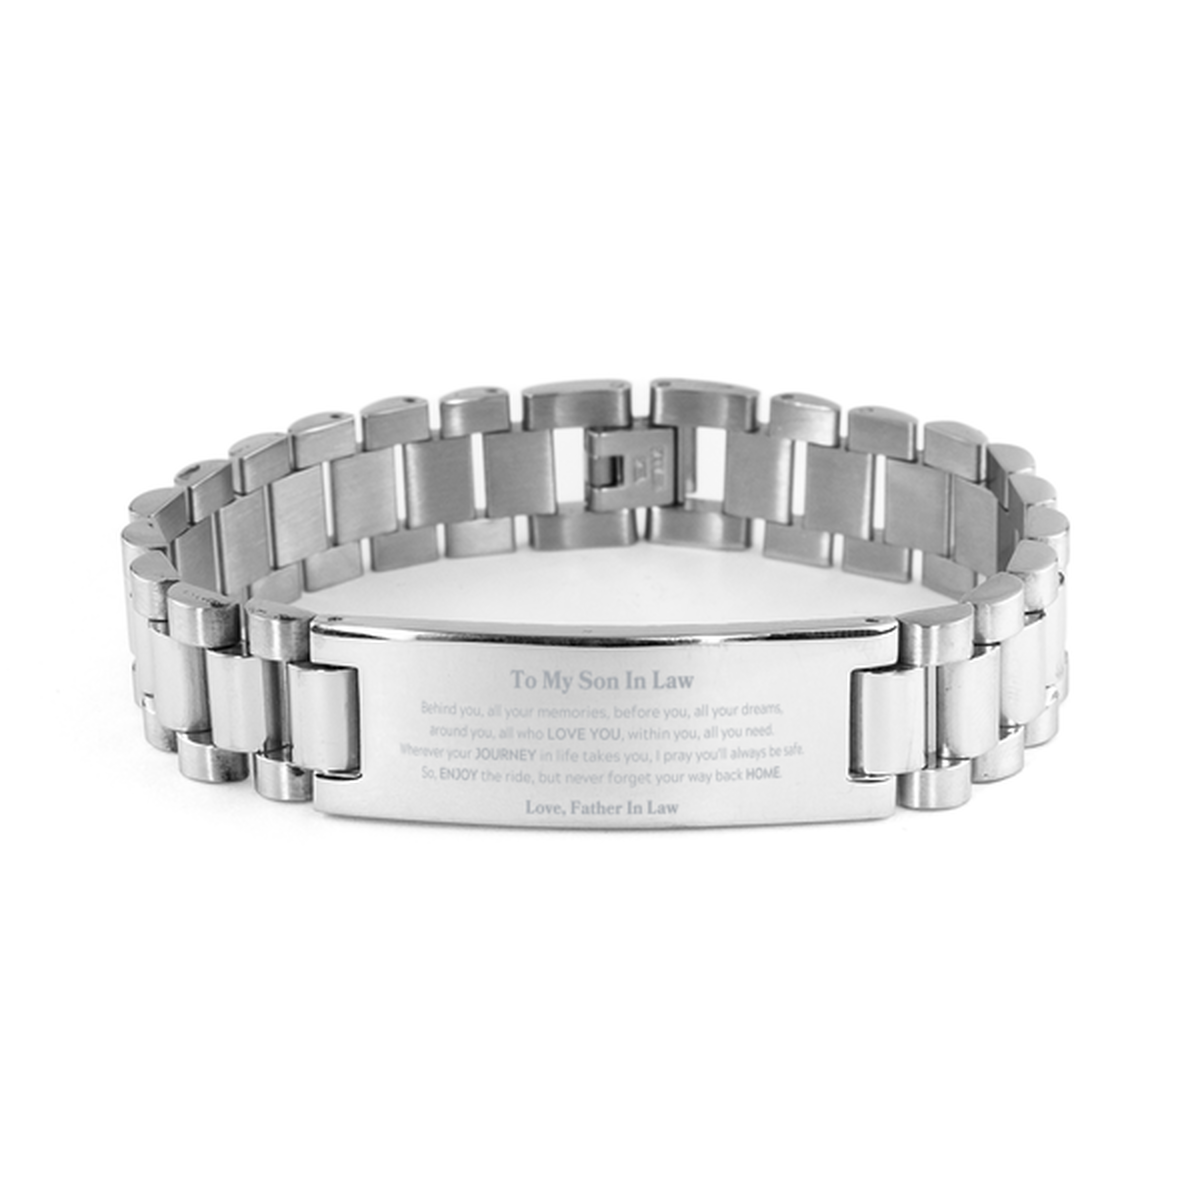 To My Son In Law Graduation Gifts from Father In Law, Son In Law Ladder Stainless Steel Bracelet Christmas Birthday Gifts for Son In Law Behind you, all your memories, before you, all your dreams. Love, Father In Law